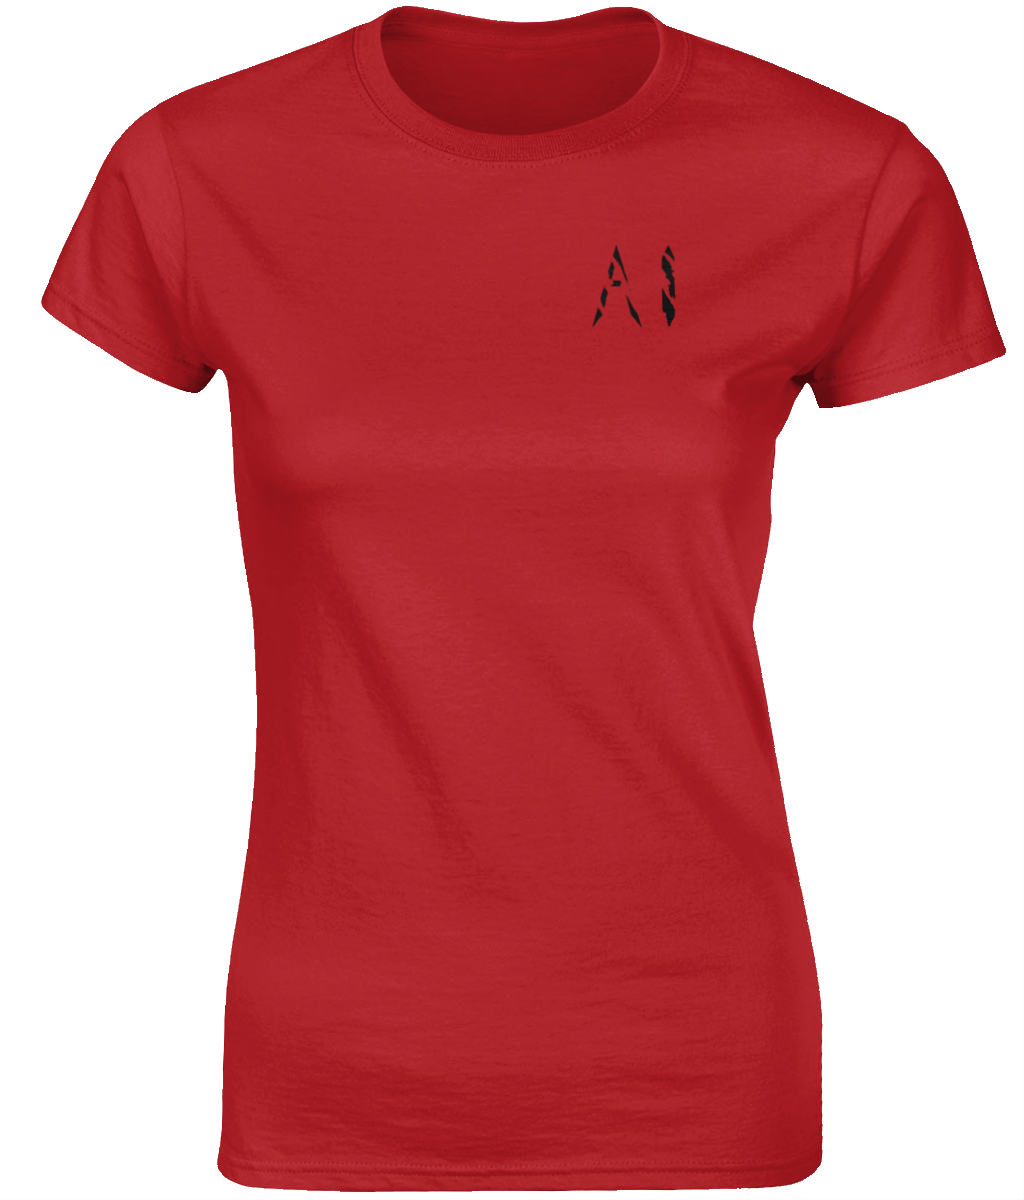 Womens Red Fitted Ringspun T-Shirt with black AI logo on left breast